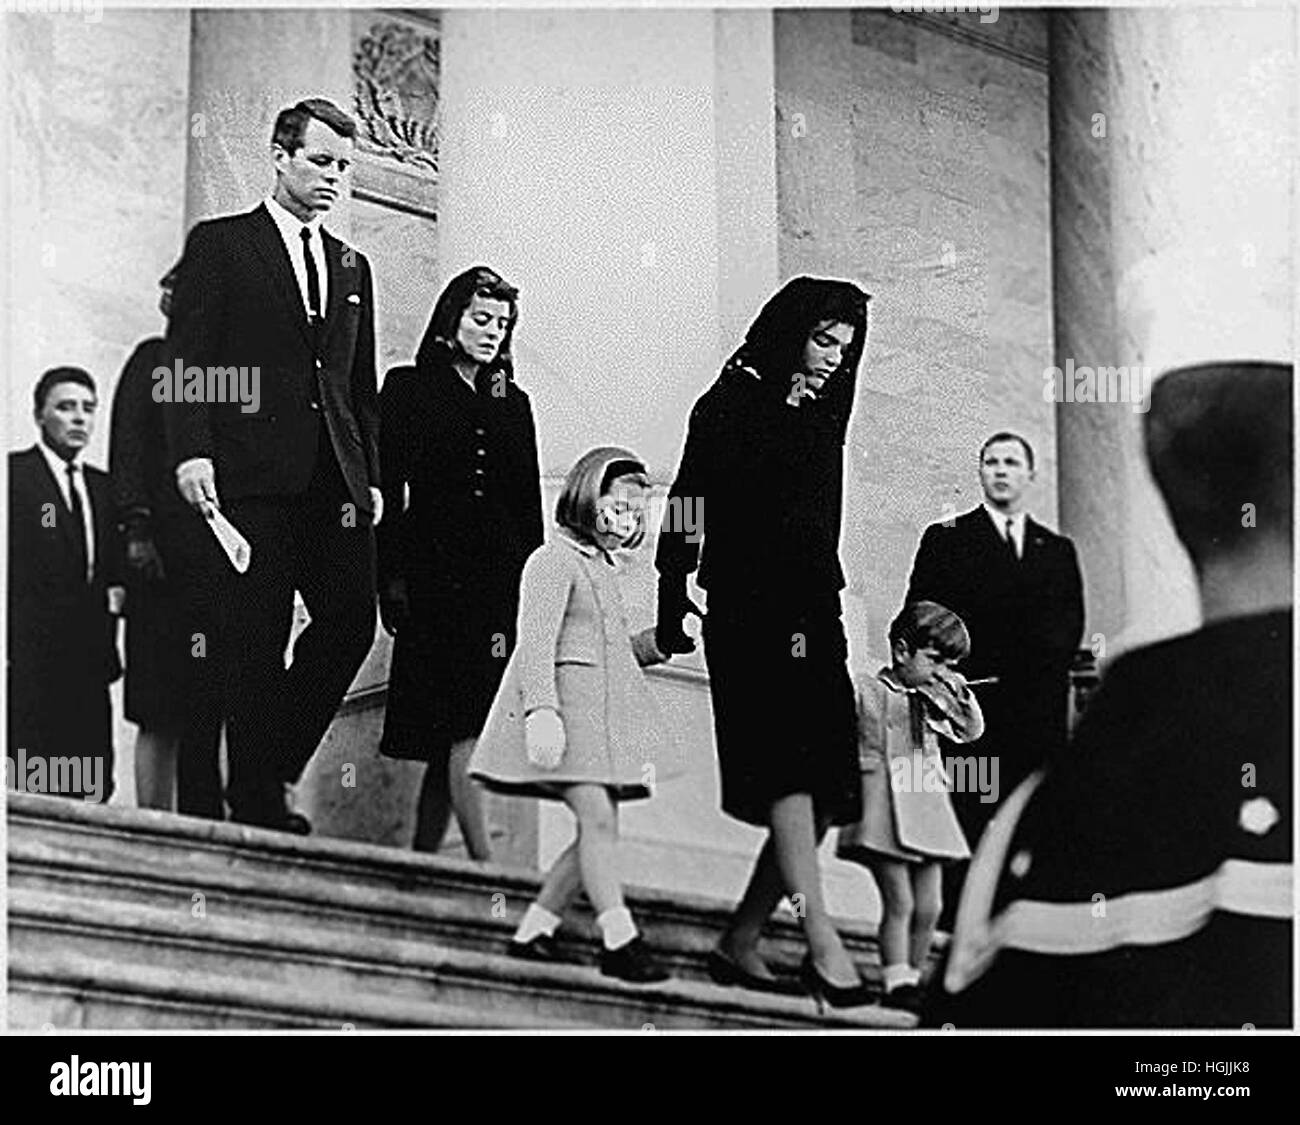 United States President John F. Kennedy's Family leaves the U.S. Capitol after Ceremony on November 24, 1963. (L-R)Caroline Kennedy, Jacqueline Bouvier Kennedy, John F. Kennedy, Jr. (2nd row) Attorney General Robert F. Kennedy, Patricia Kennedy Lawford (hidden) Jean Kennedy Smith (3rd Row) Peter Lawford. Credit: JFK Library via CNP - NO WIRE SERVICE - Photo: Jfk Library/Consolidated News Photos/JFK Library via CNP Stock Photo